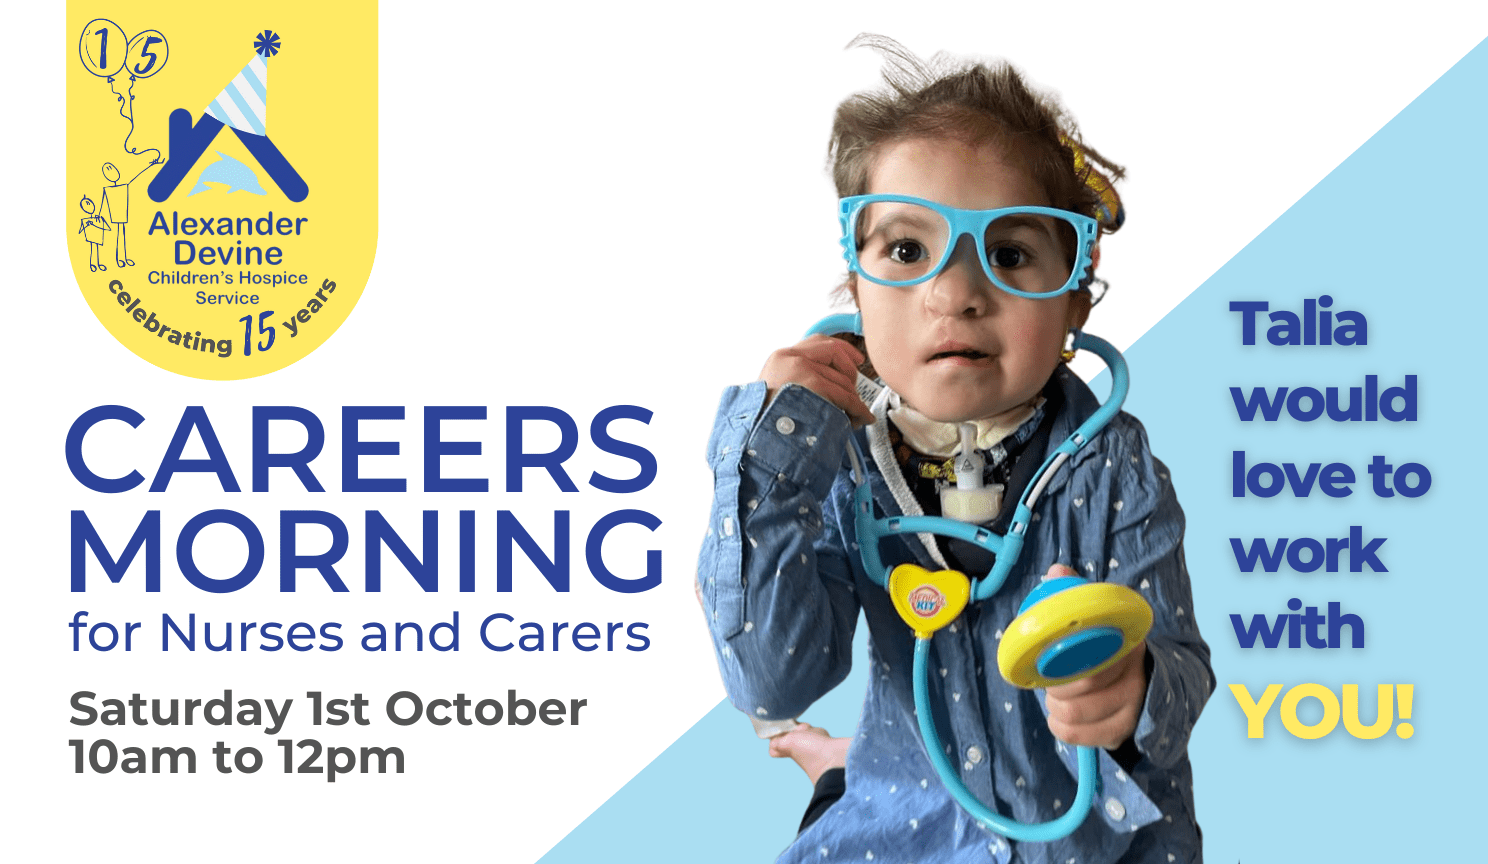 Careers Morning for Nurses and Carers, 1st October